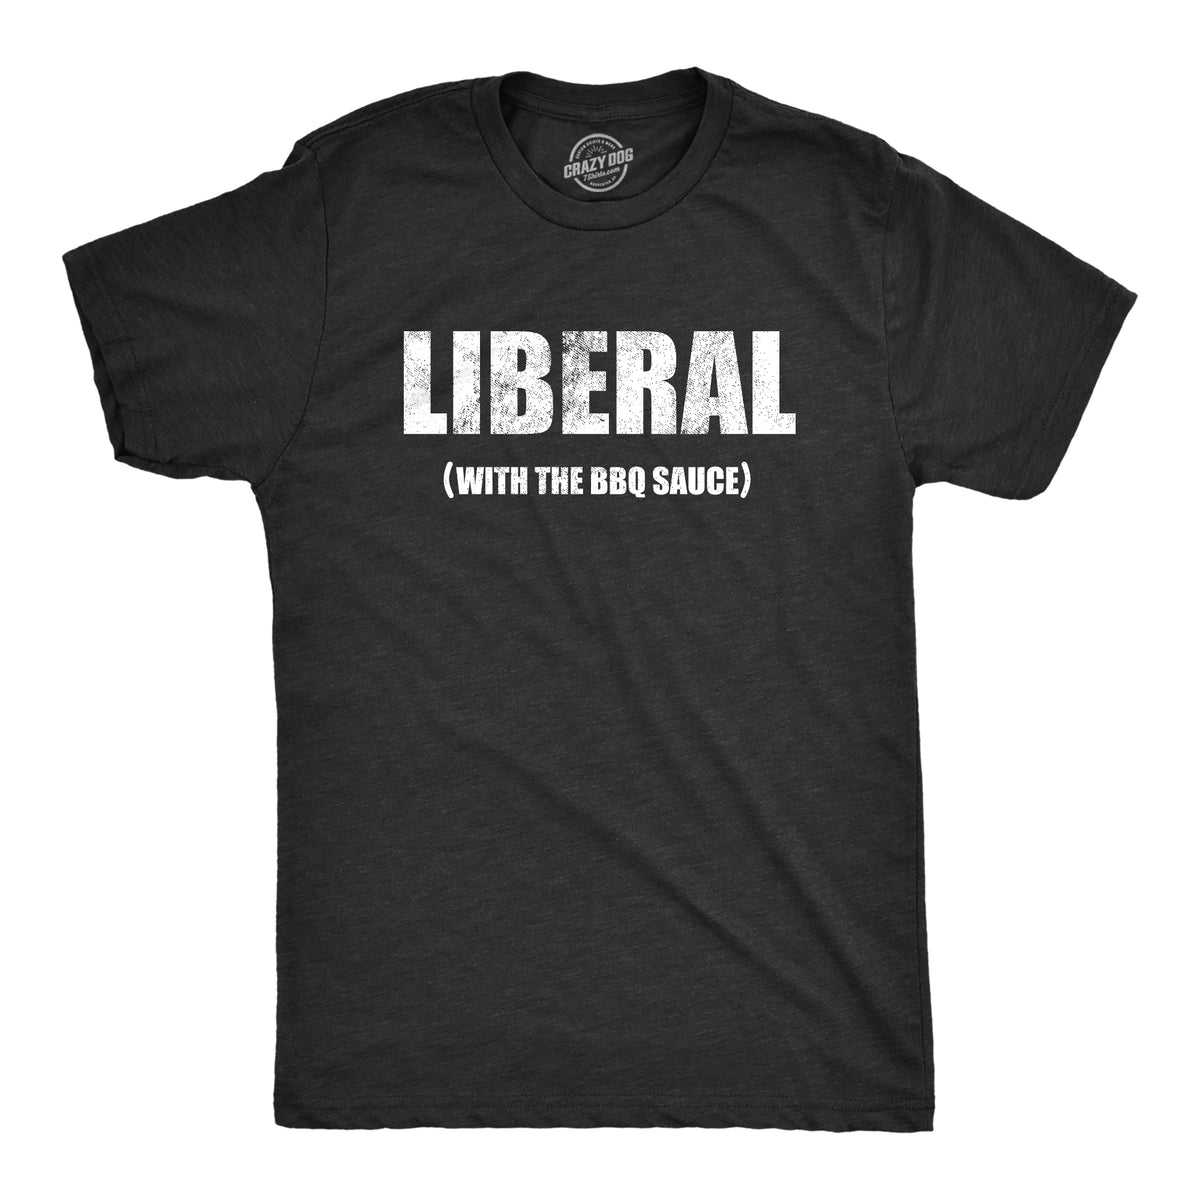 Funny Heather Black - LIBERAL Liberal With The BBQ Sauce Mens T Shirt Nerdy Food sarcastic Tee